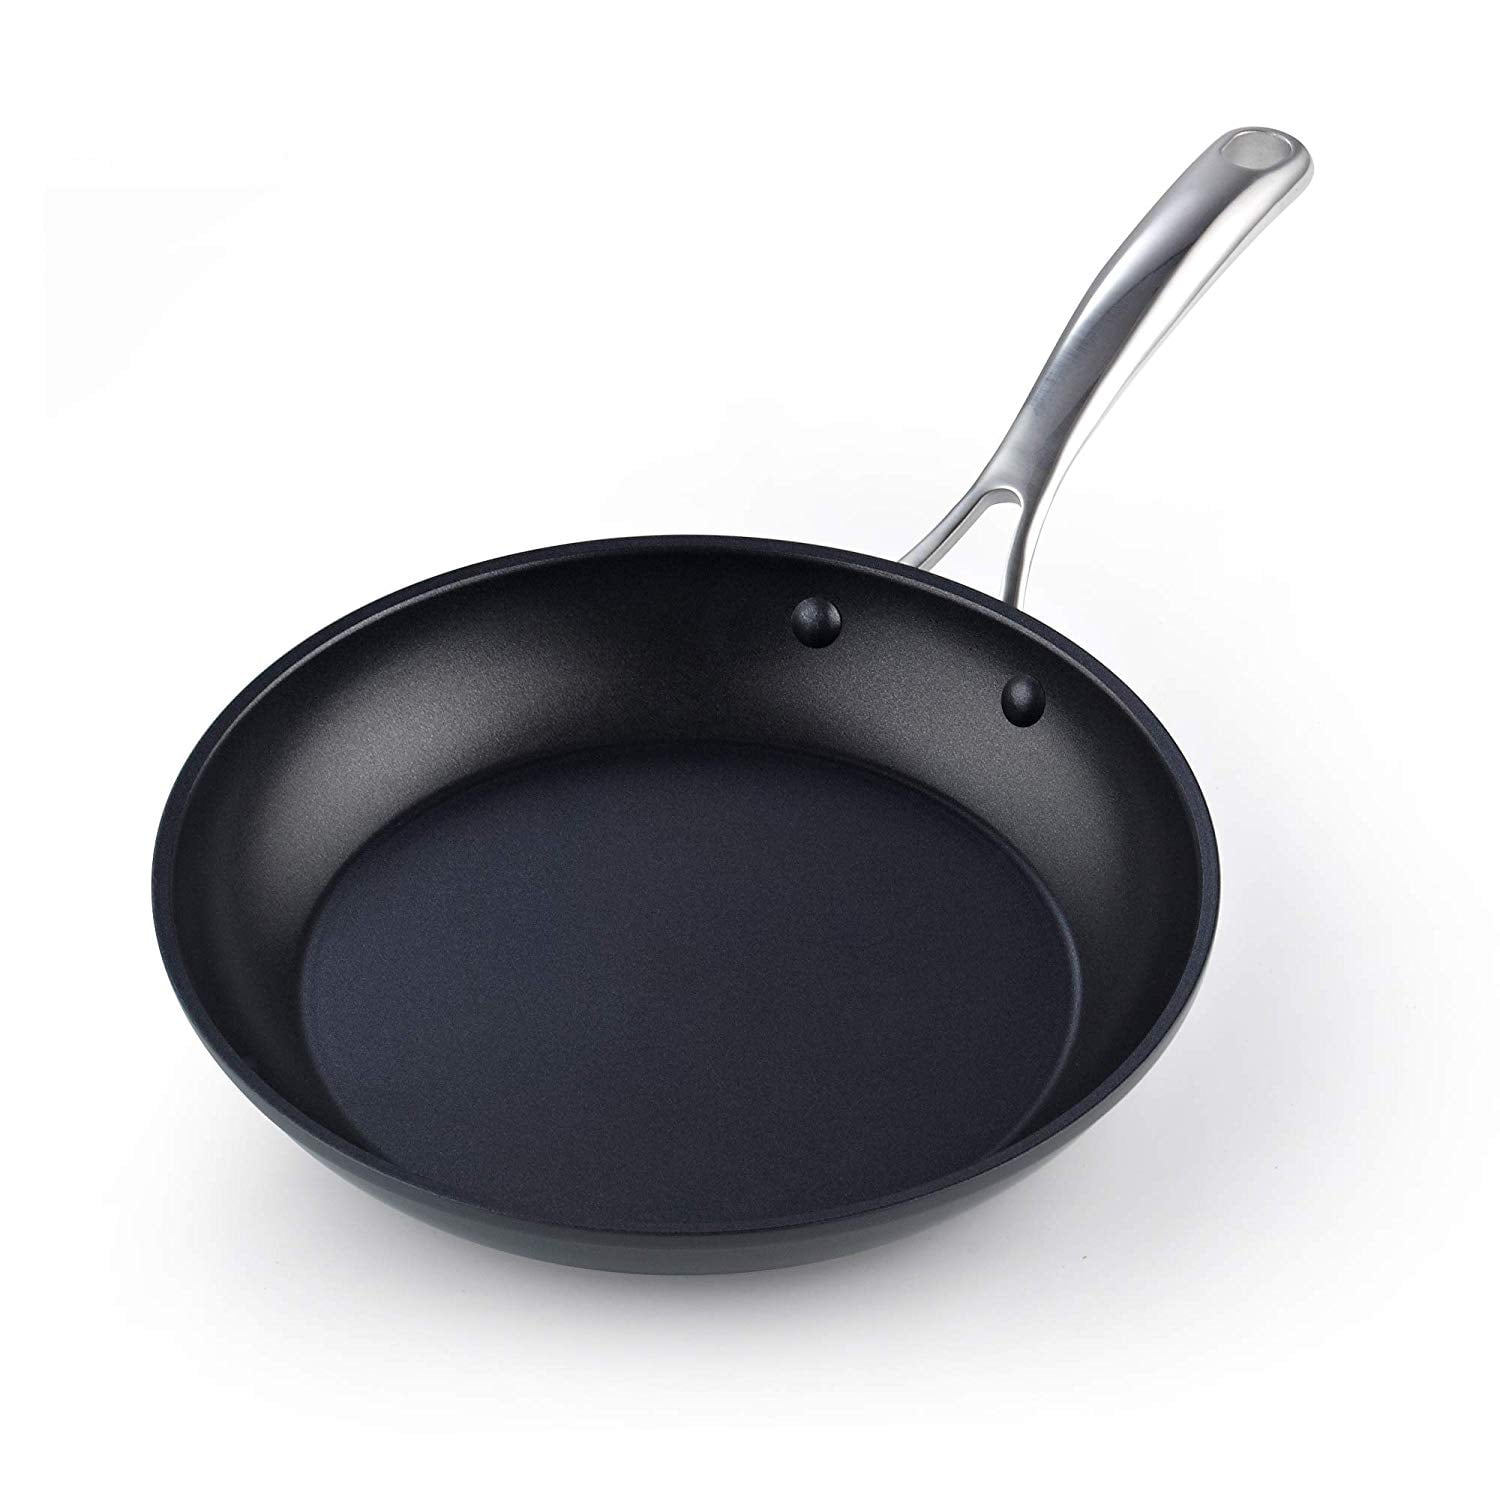 Belwares Nonstick Frying Pan with Spatula & Lid – 10 Inch Non Stick Skillet  Egg Frying Pan – Lightweight Aluminum Hard-Anodized Fry Pan for Kitchen